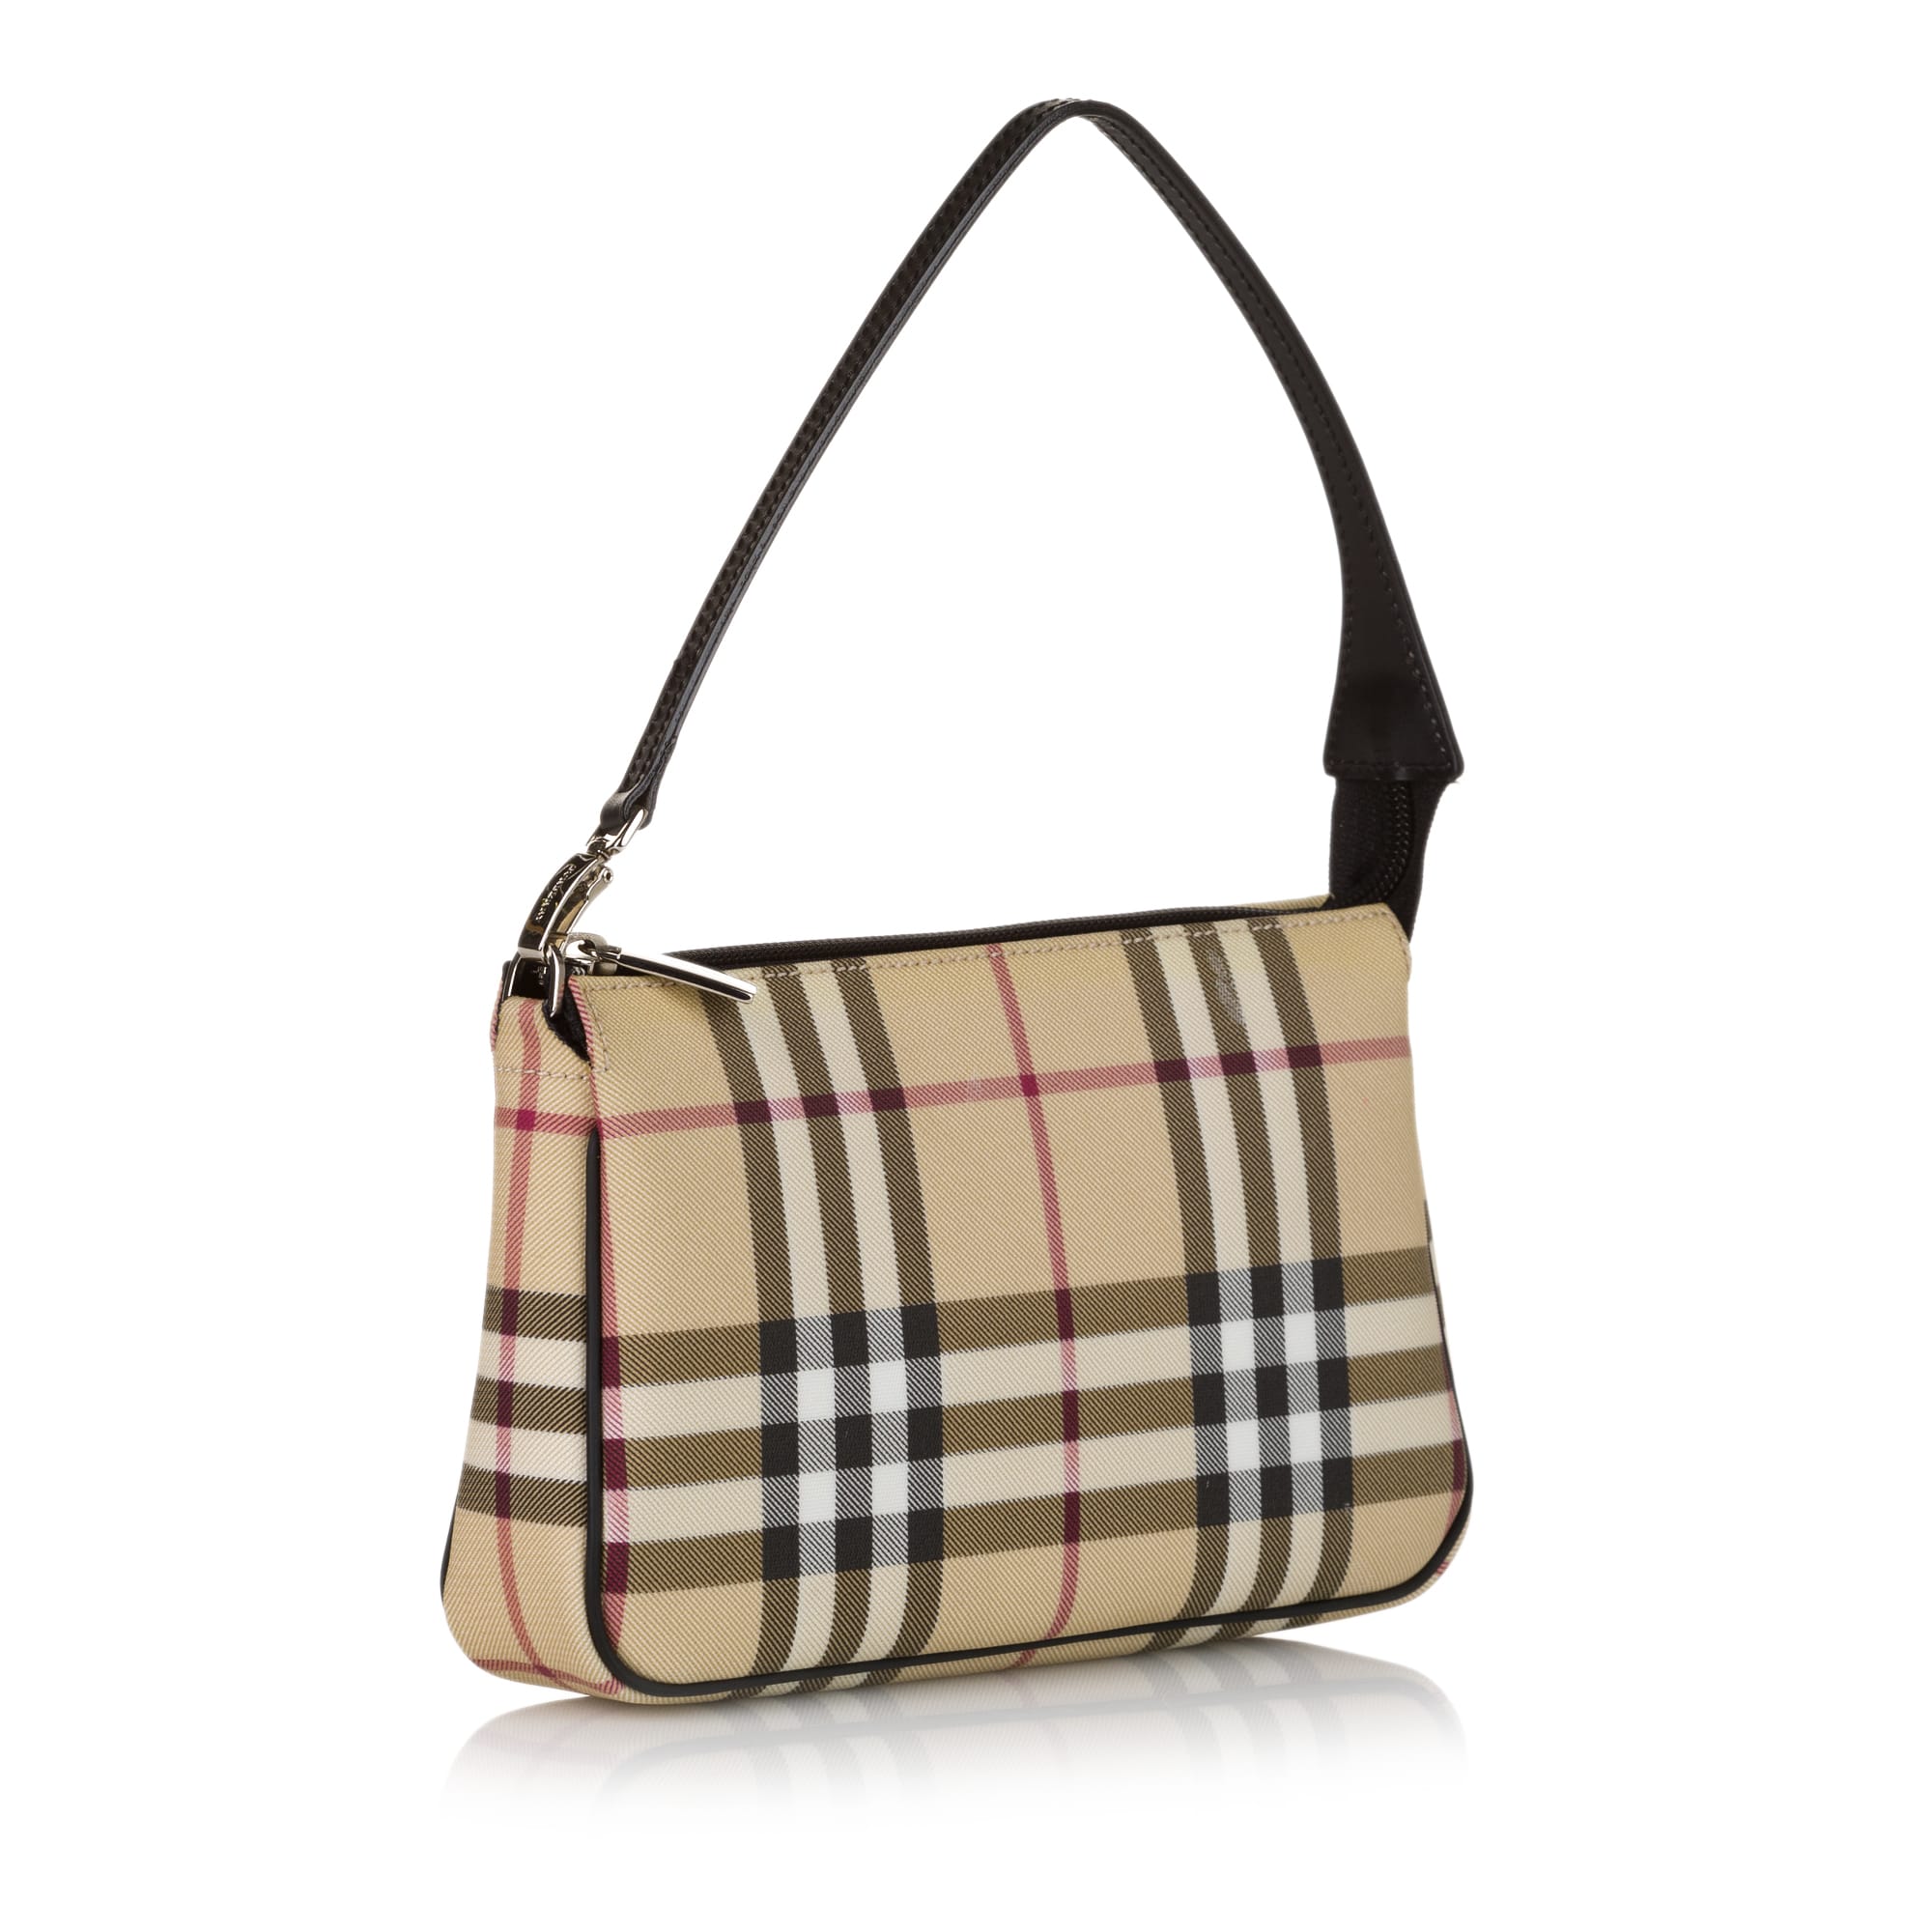 Burberry House Check Baguette, ONESIZE, beige